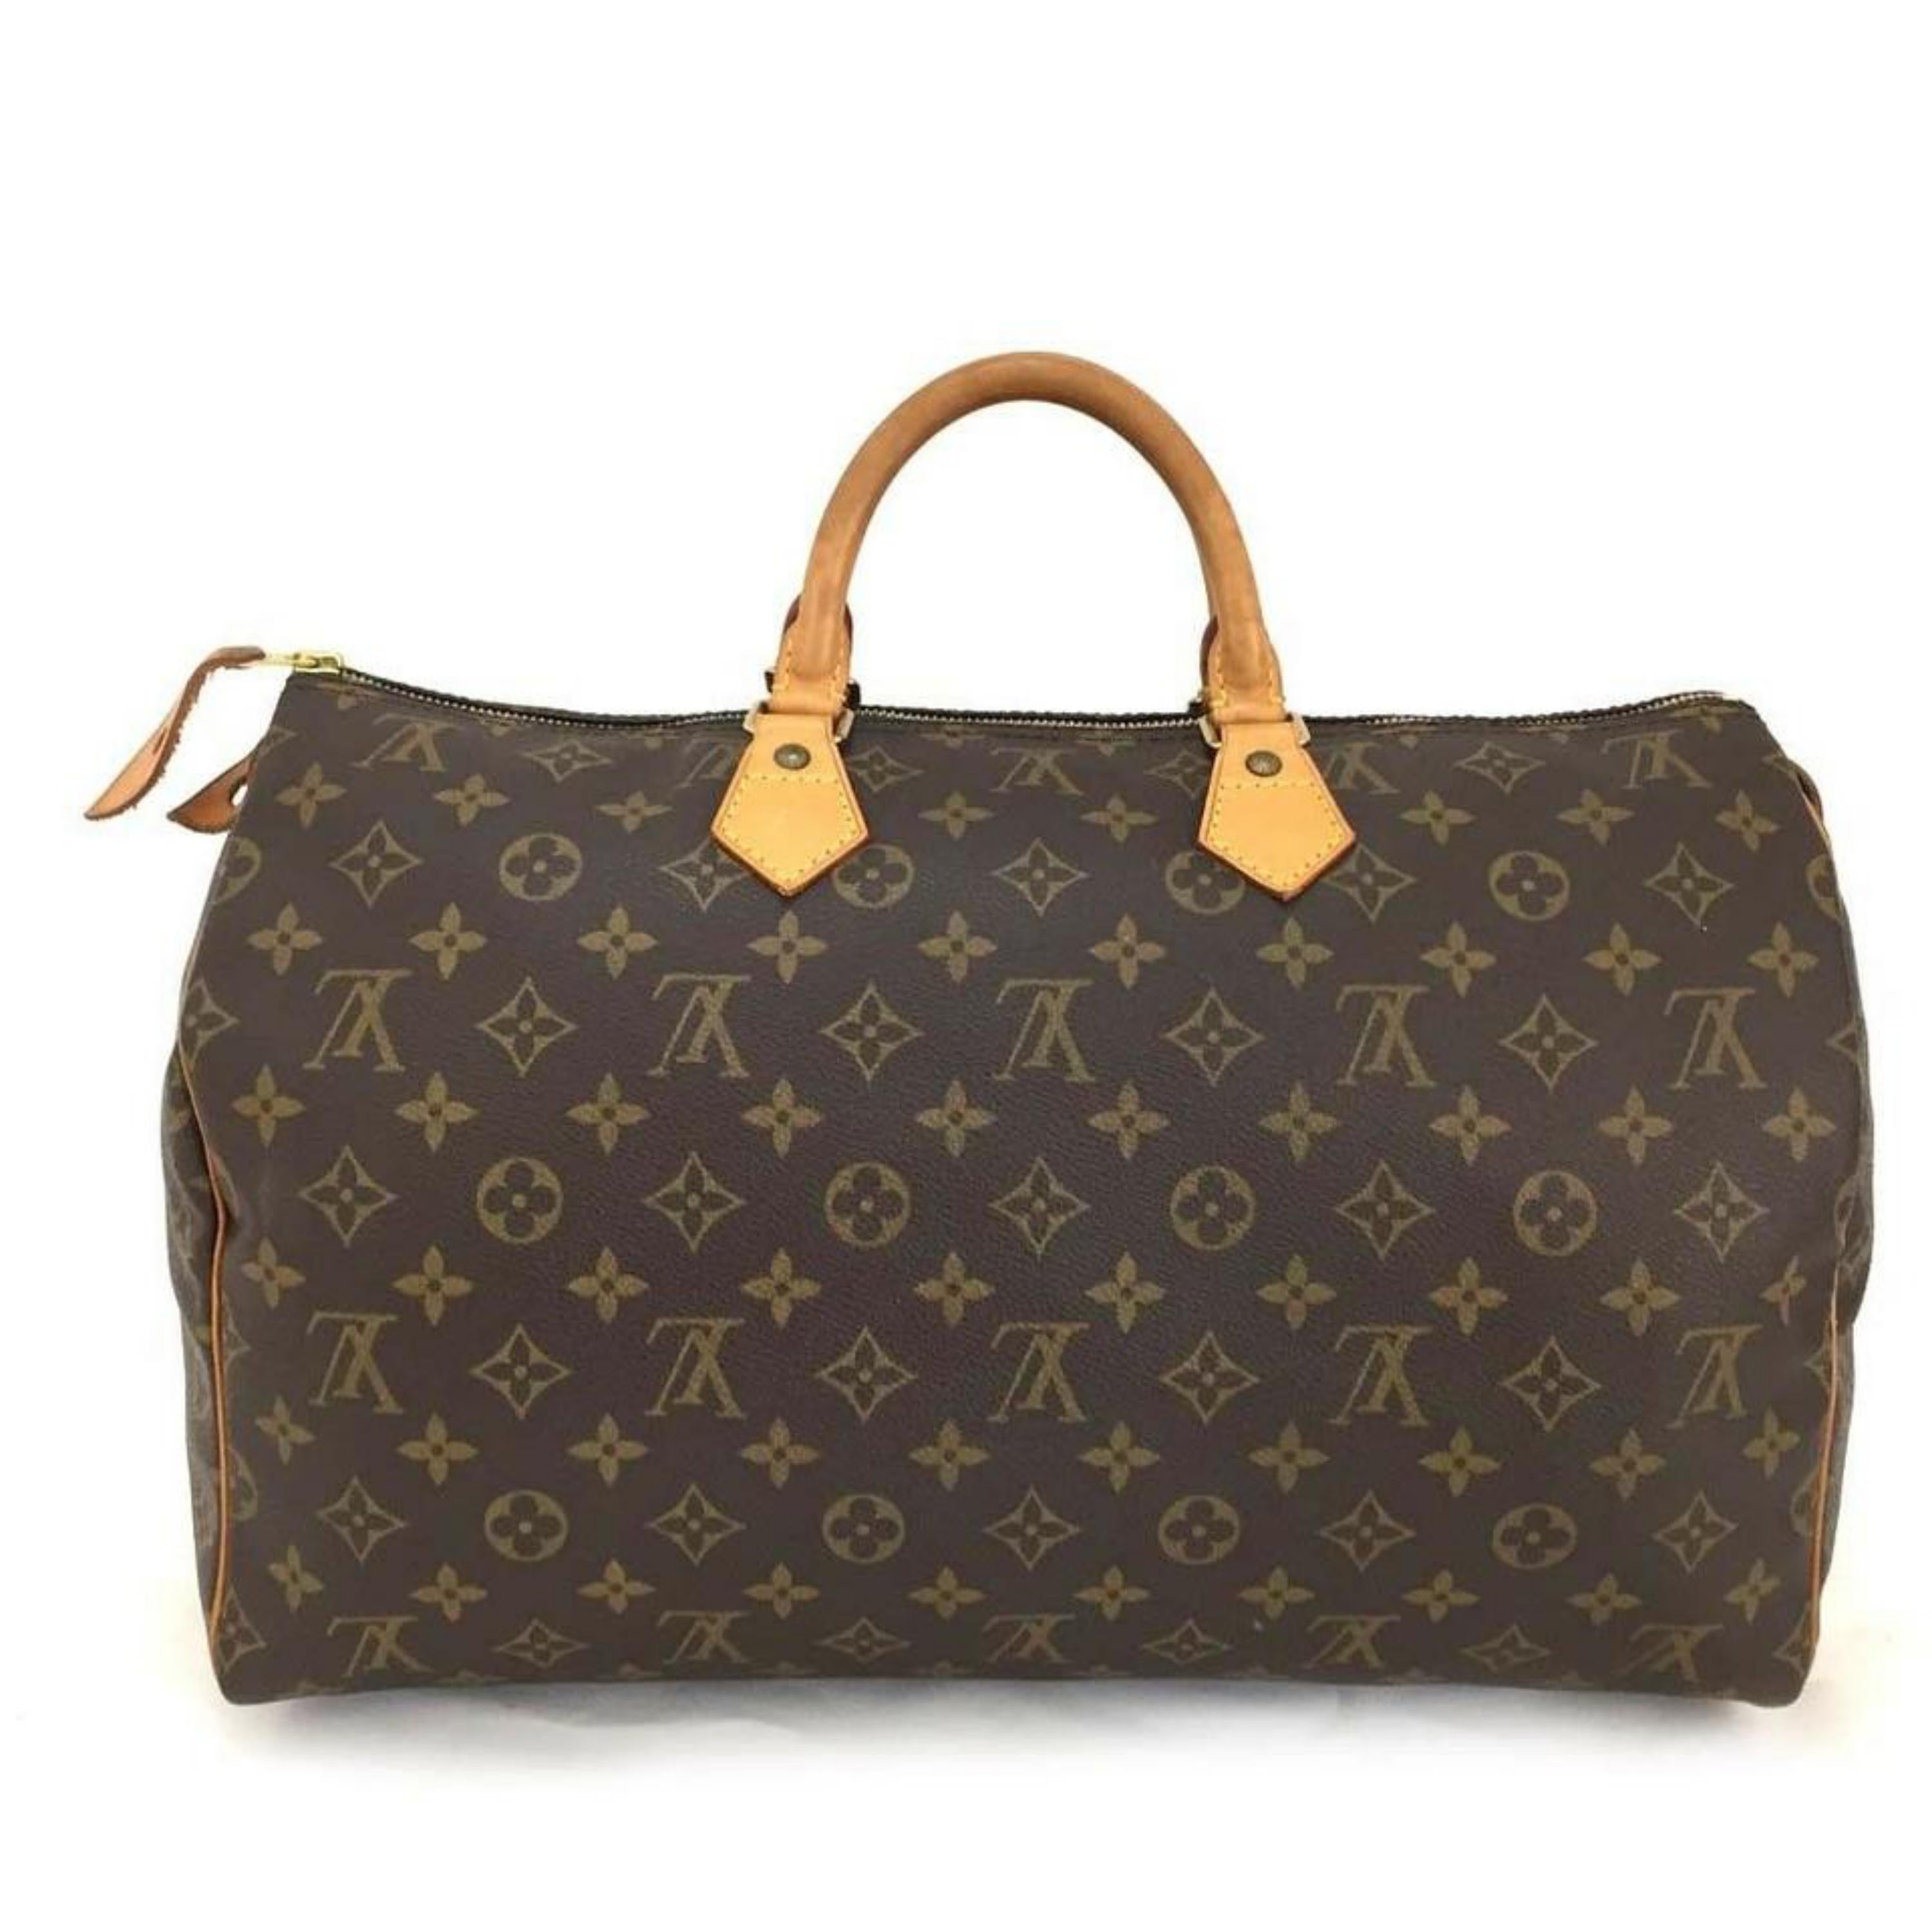 Louis Vuitton Speedy 40 Boston Gm 870010 Brown Coated Canvas Weekend/Travel Bag For Sale 6